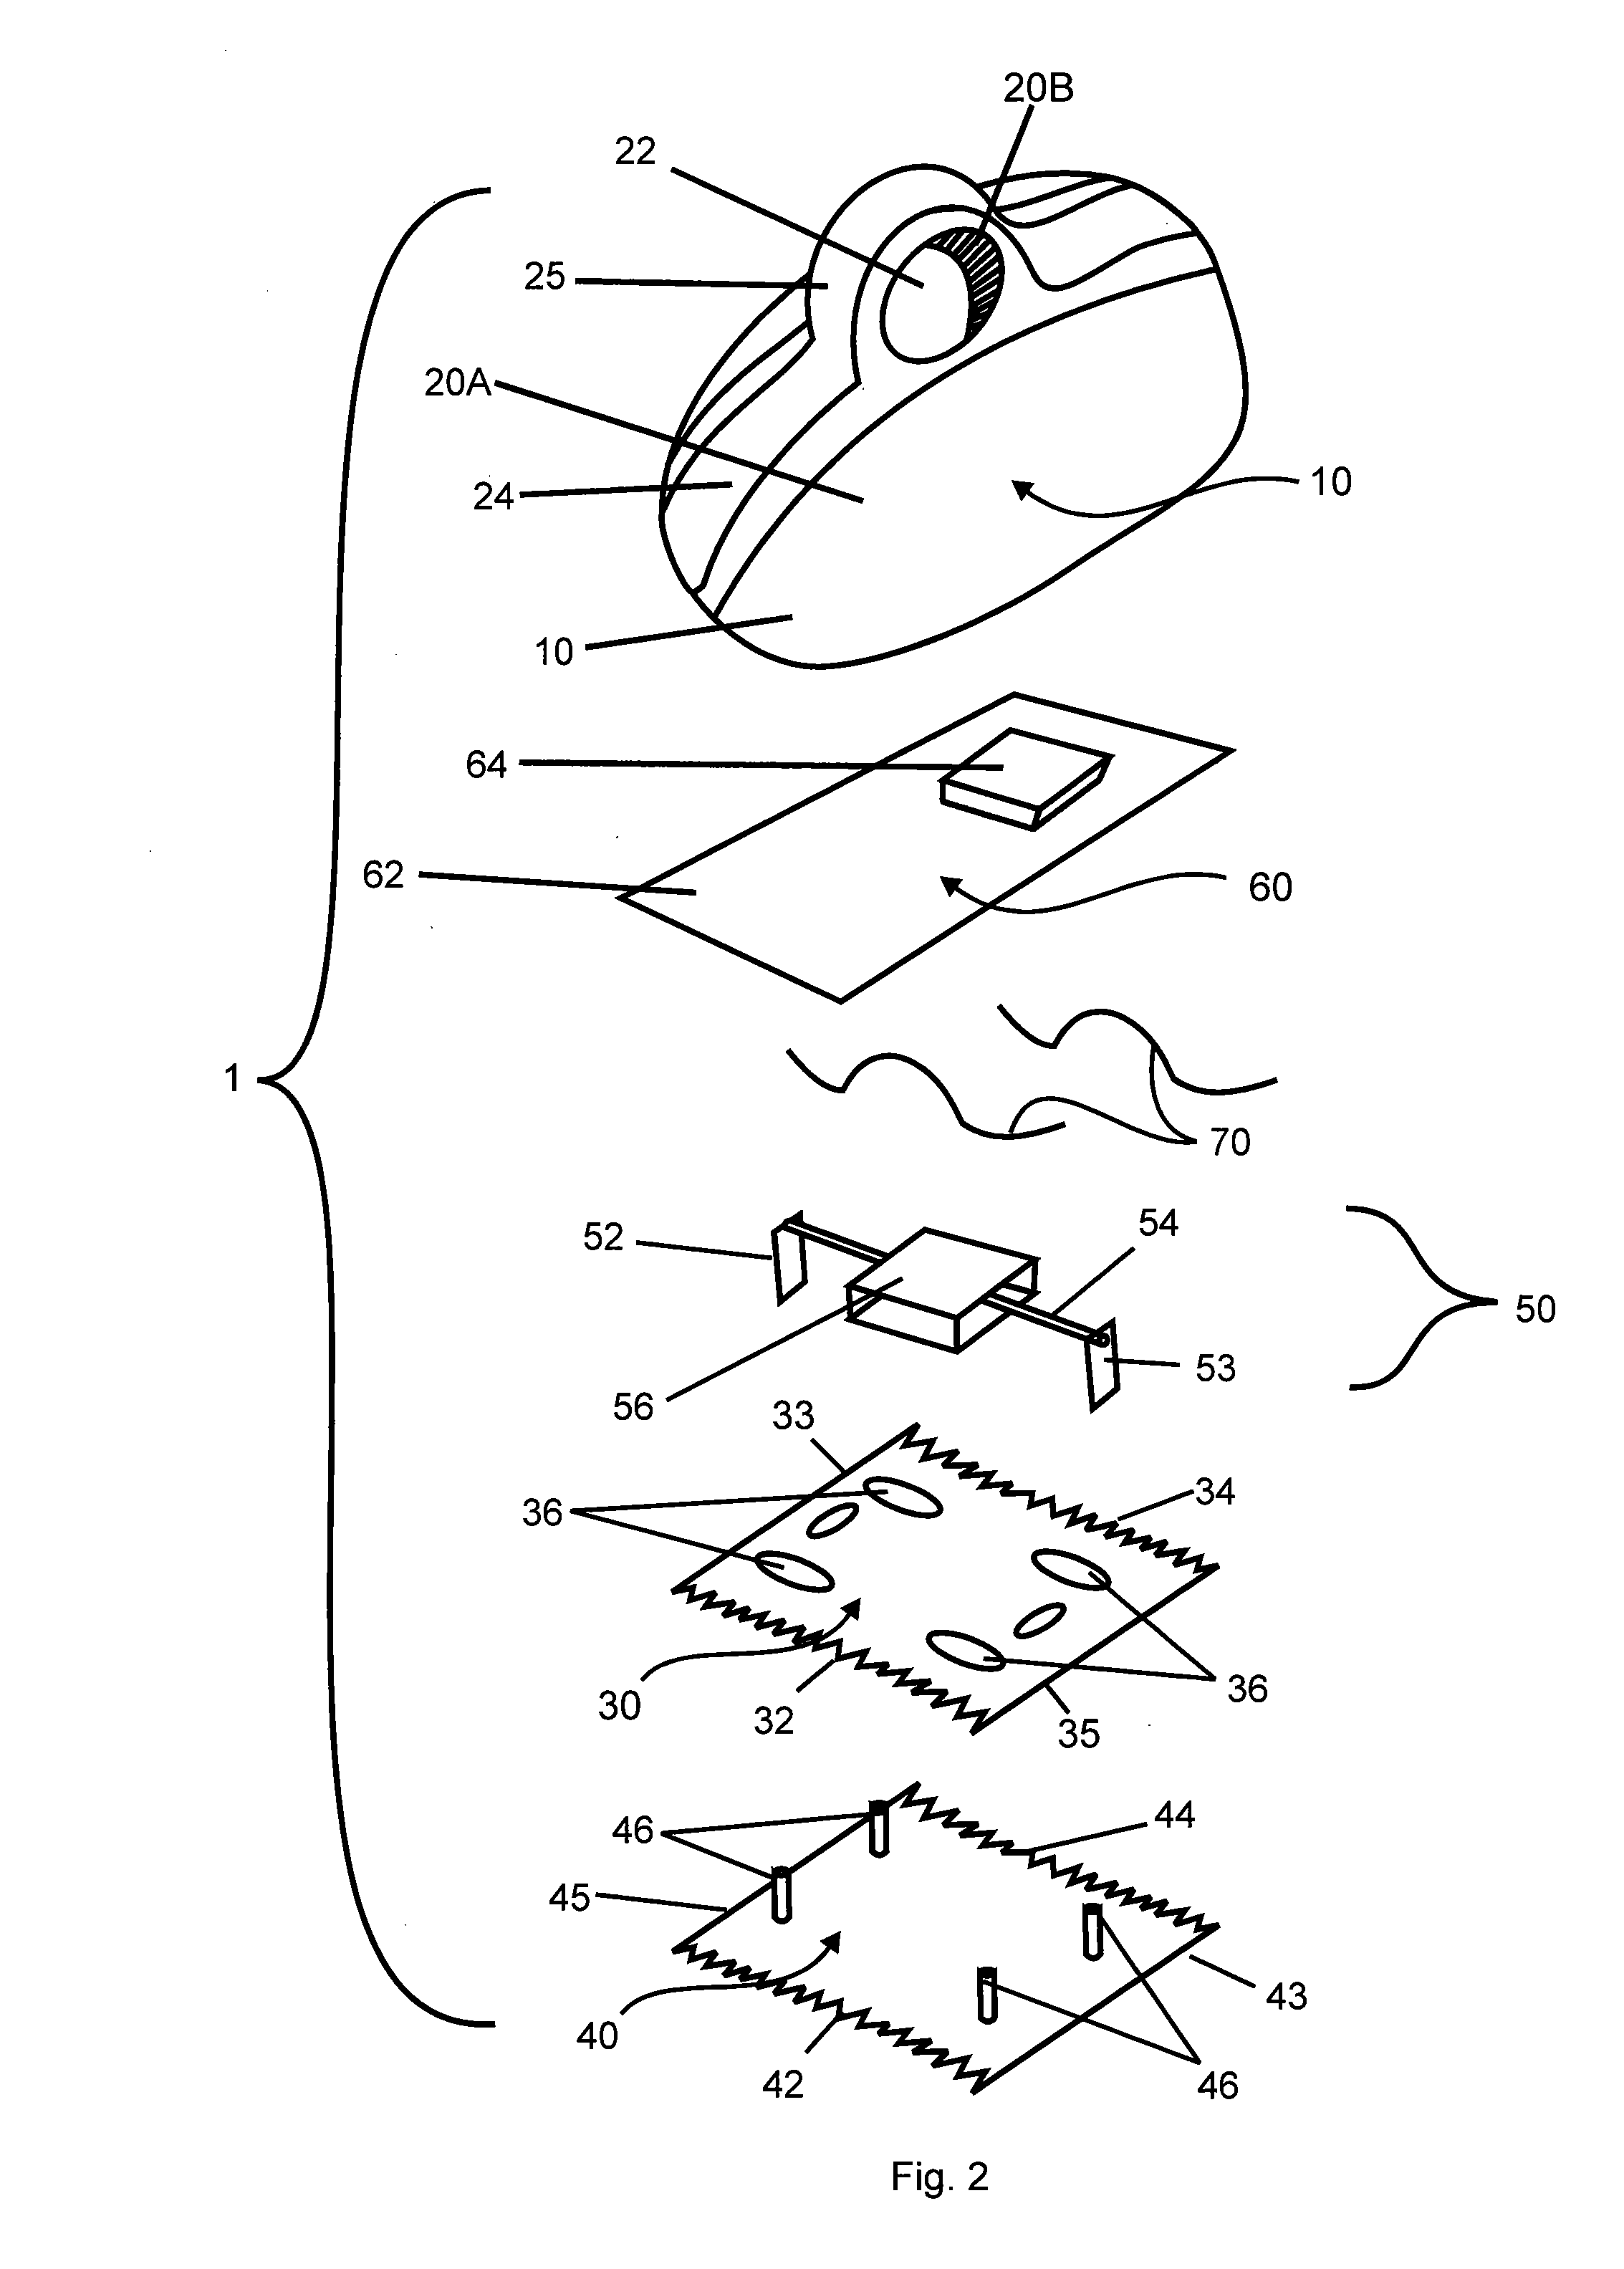 Hair cutting apparatus and method of use